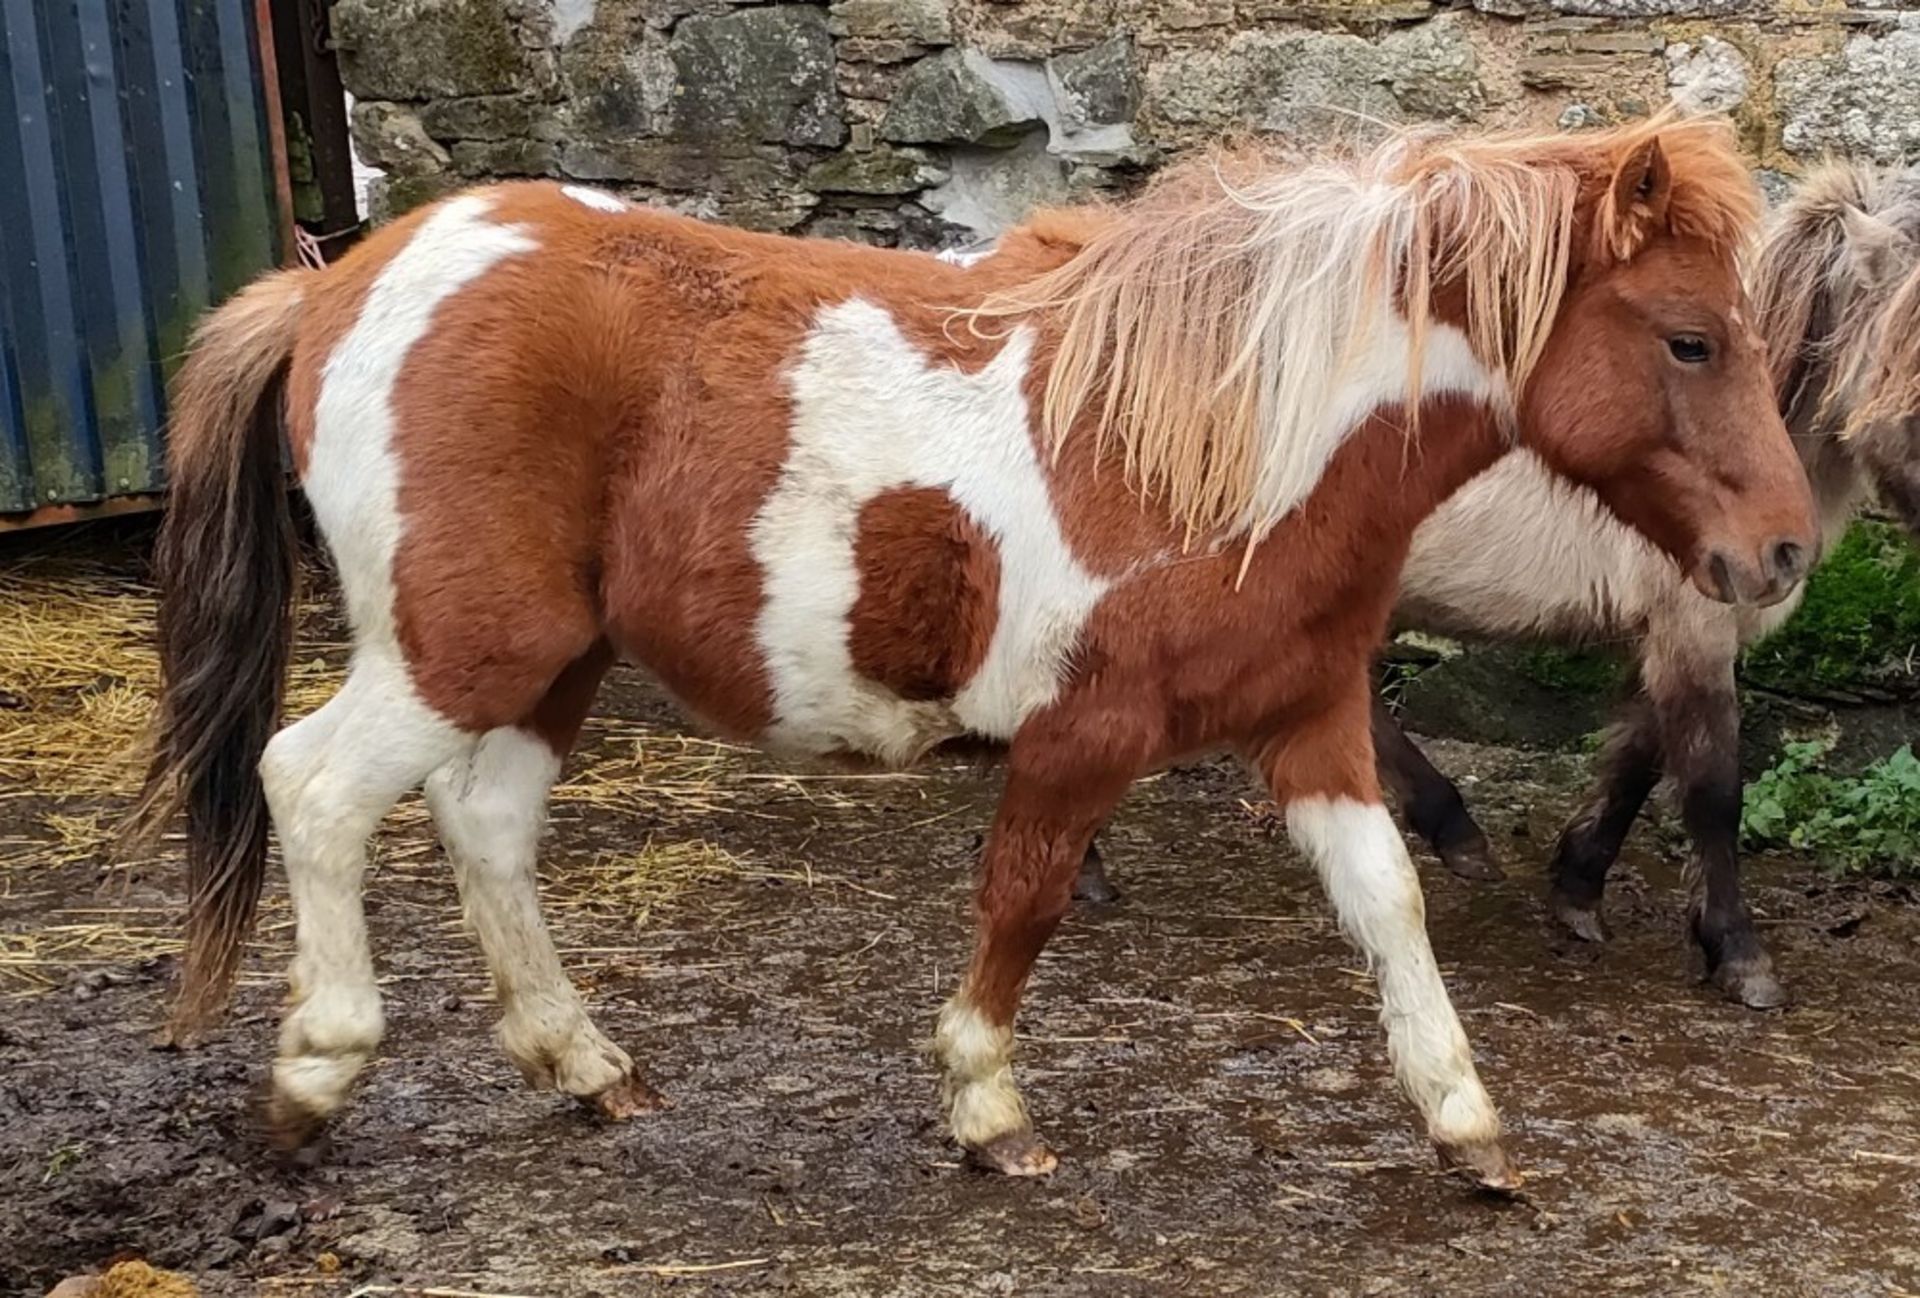 'GODSWORTHY' DARTMOOR HILL PONY SKEWBALD FILLY APPROX 18 MONTHS OLD - Image 4 of 6